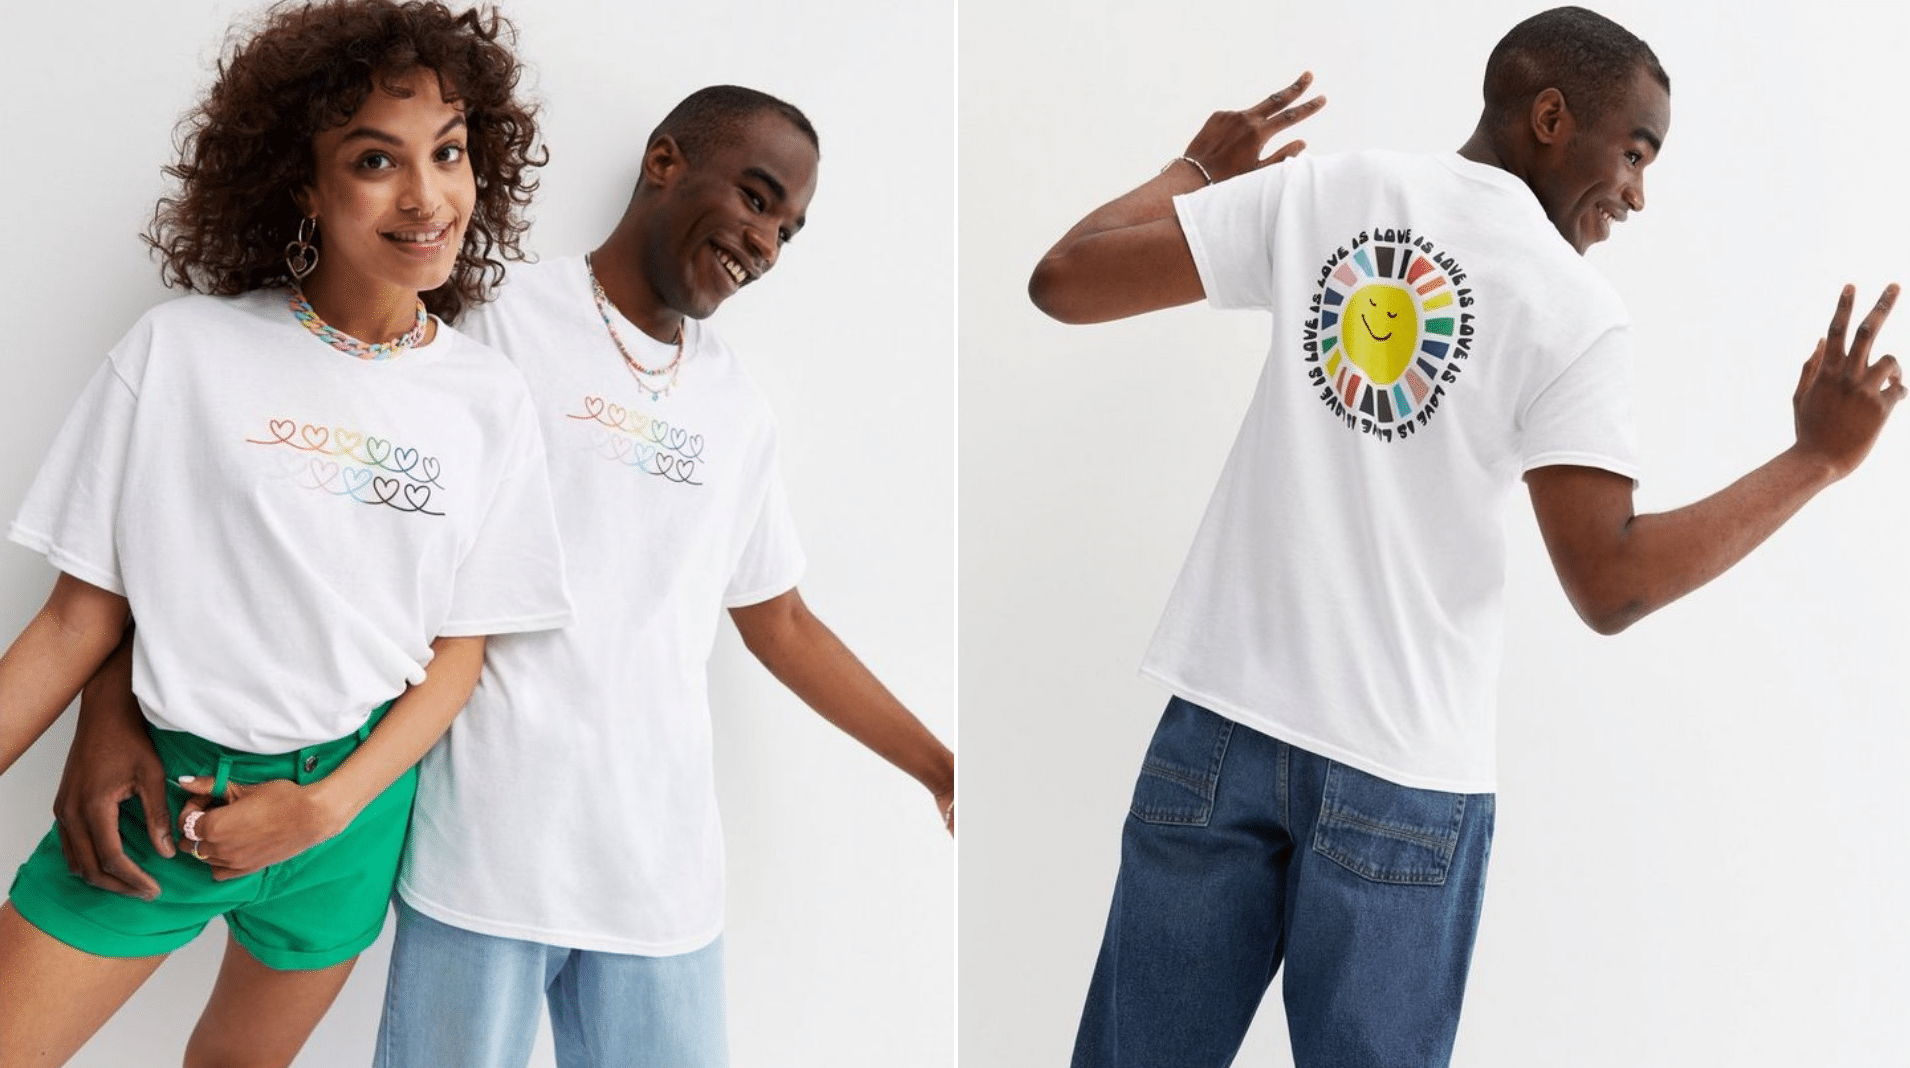 The New Look Pride collection is inspired by the progress flag.